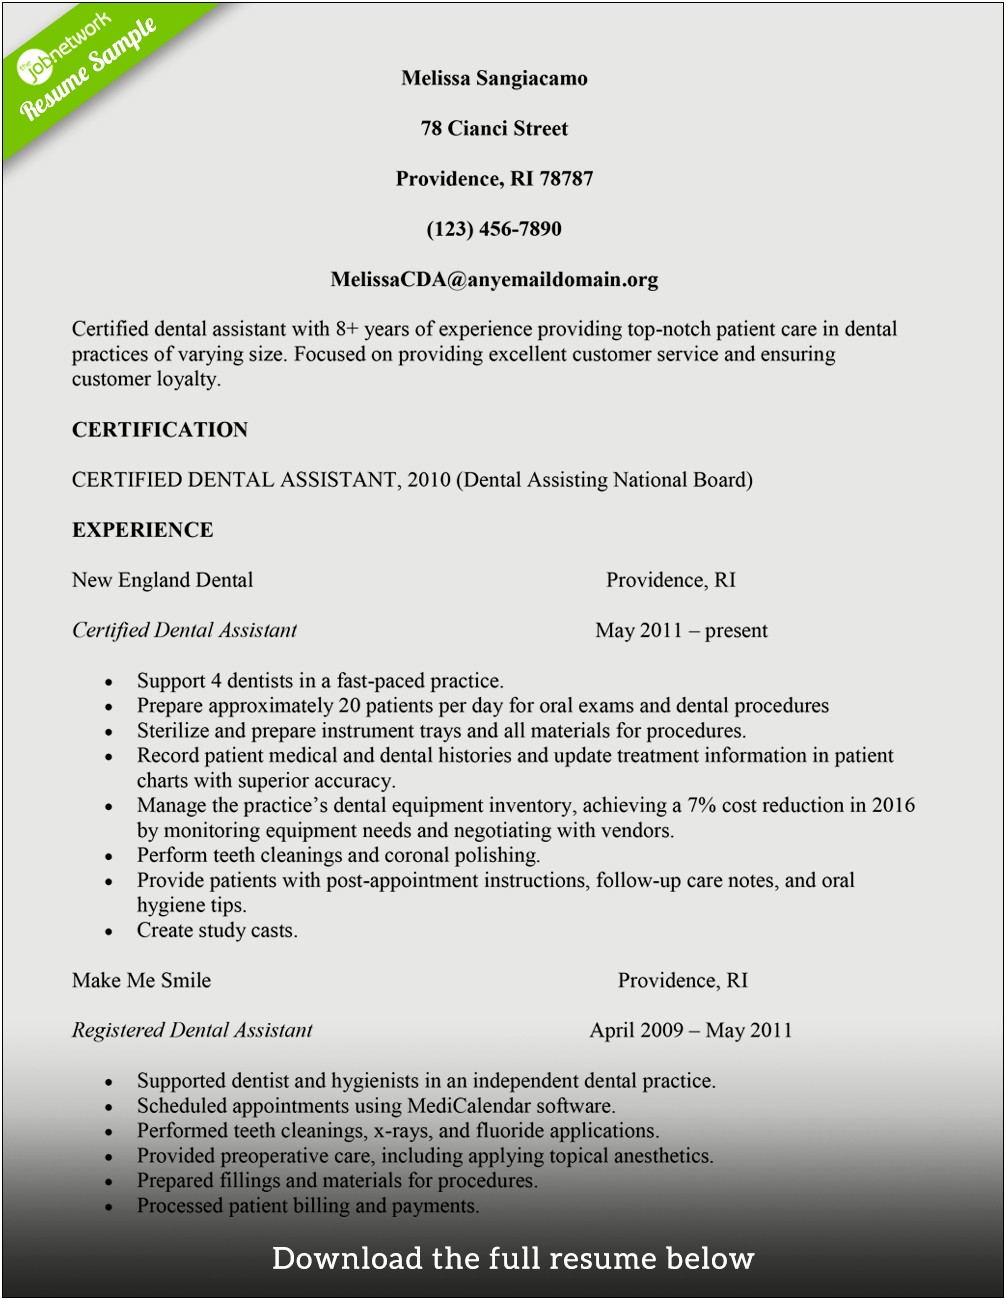 Current Best Medical Assistant Resume With No Experience